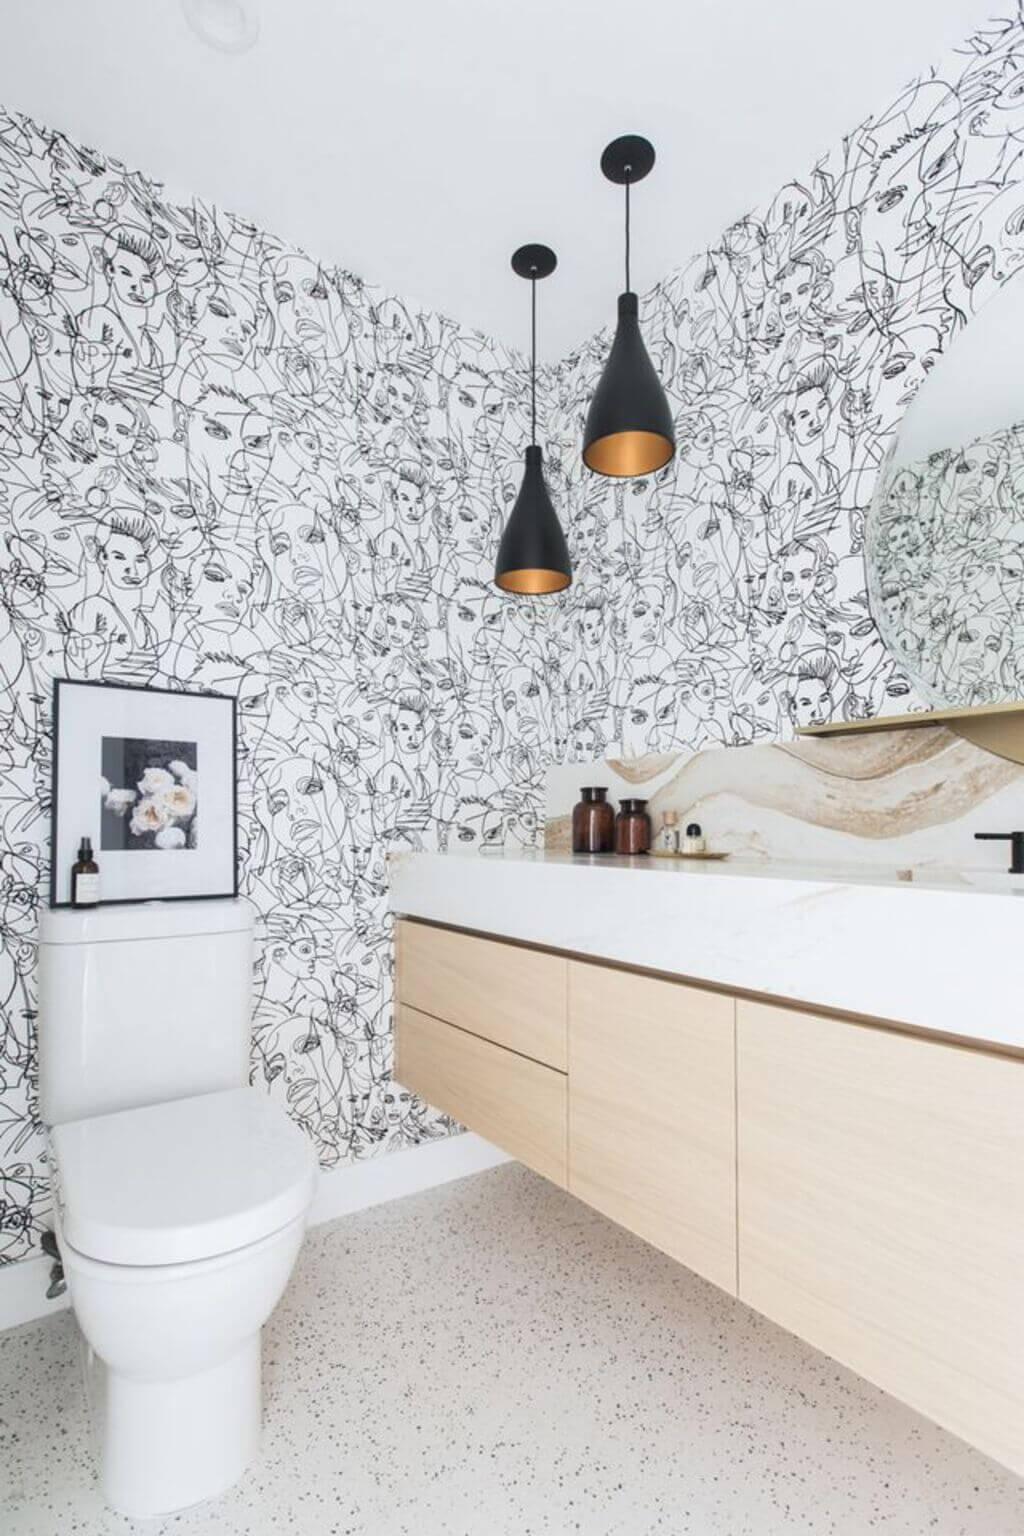 A bathroom with a toilet, sink, and Wallpaper with Prints
